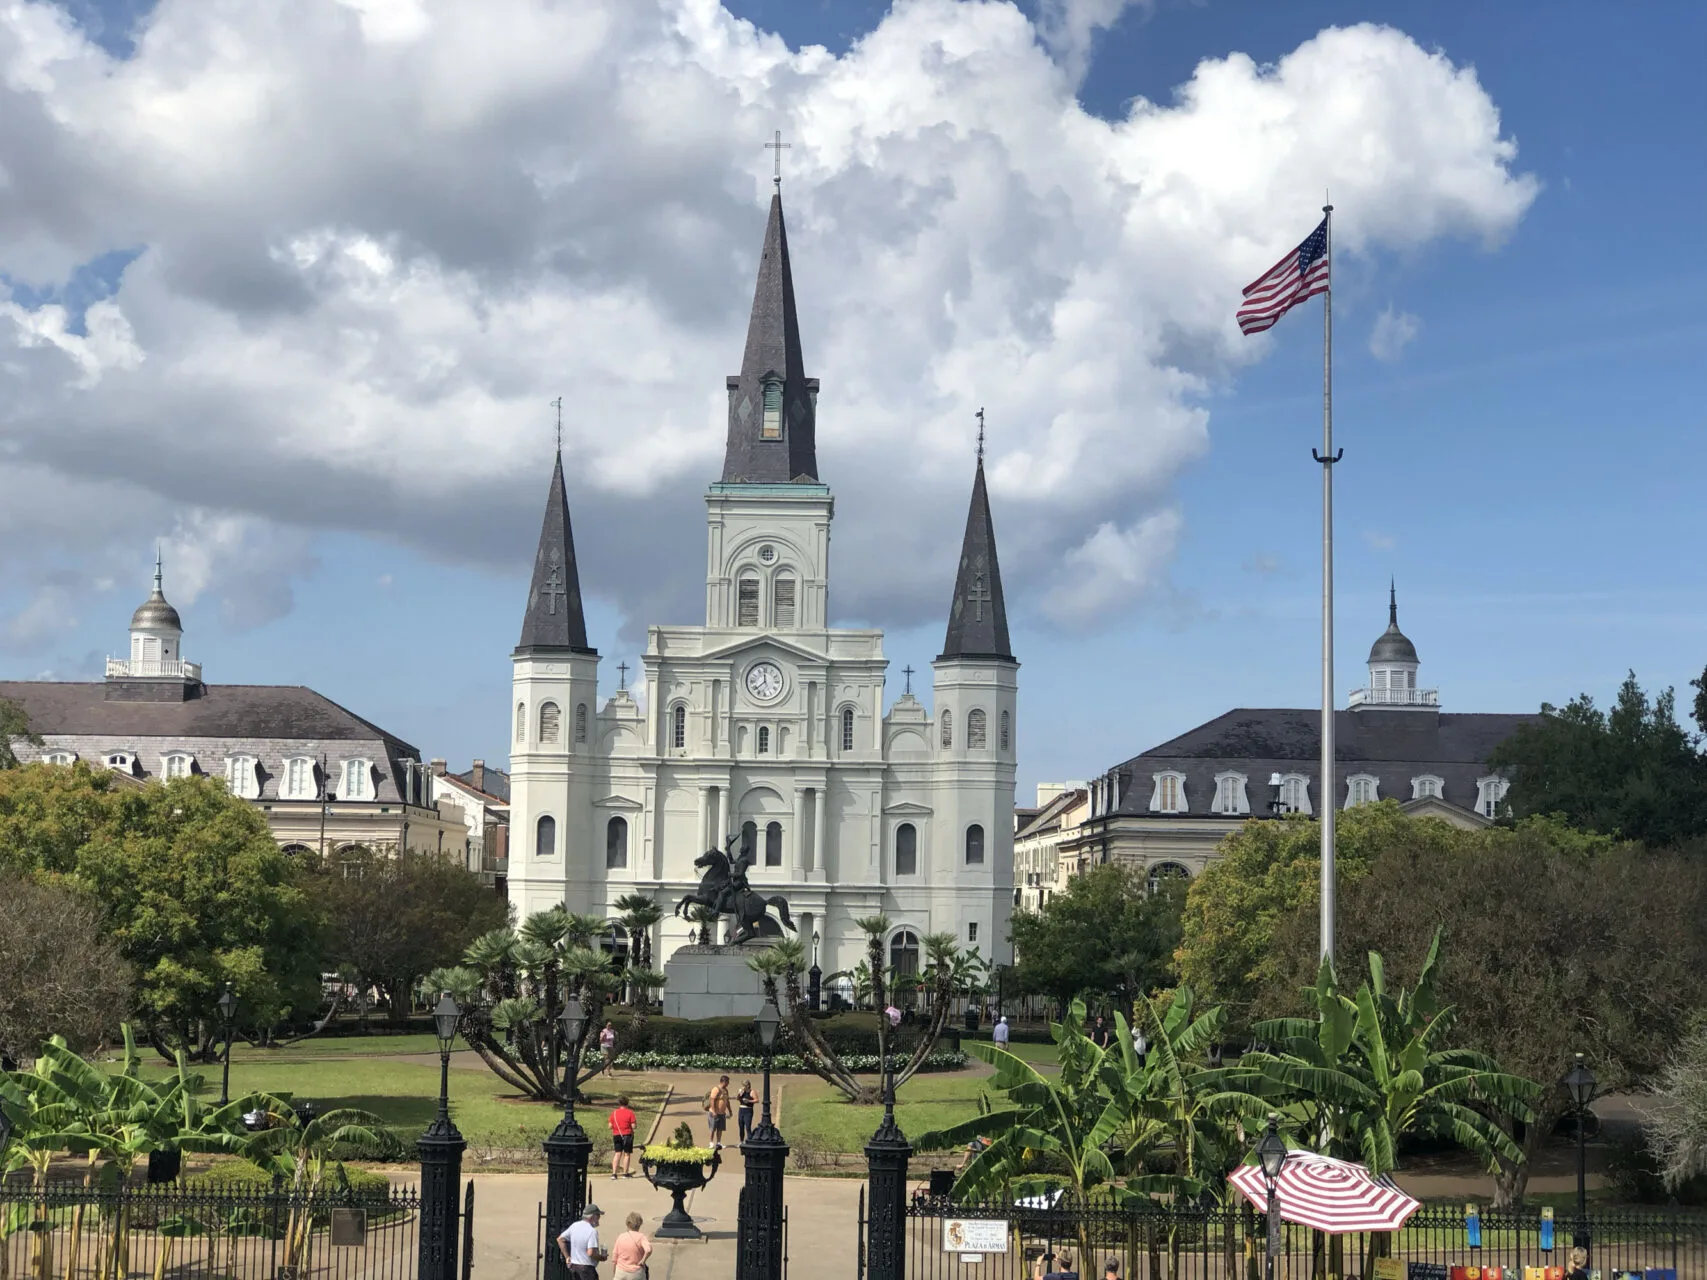 The St. Louis Cathedral is one of the best attractions in New Orleans.